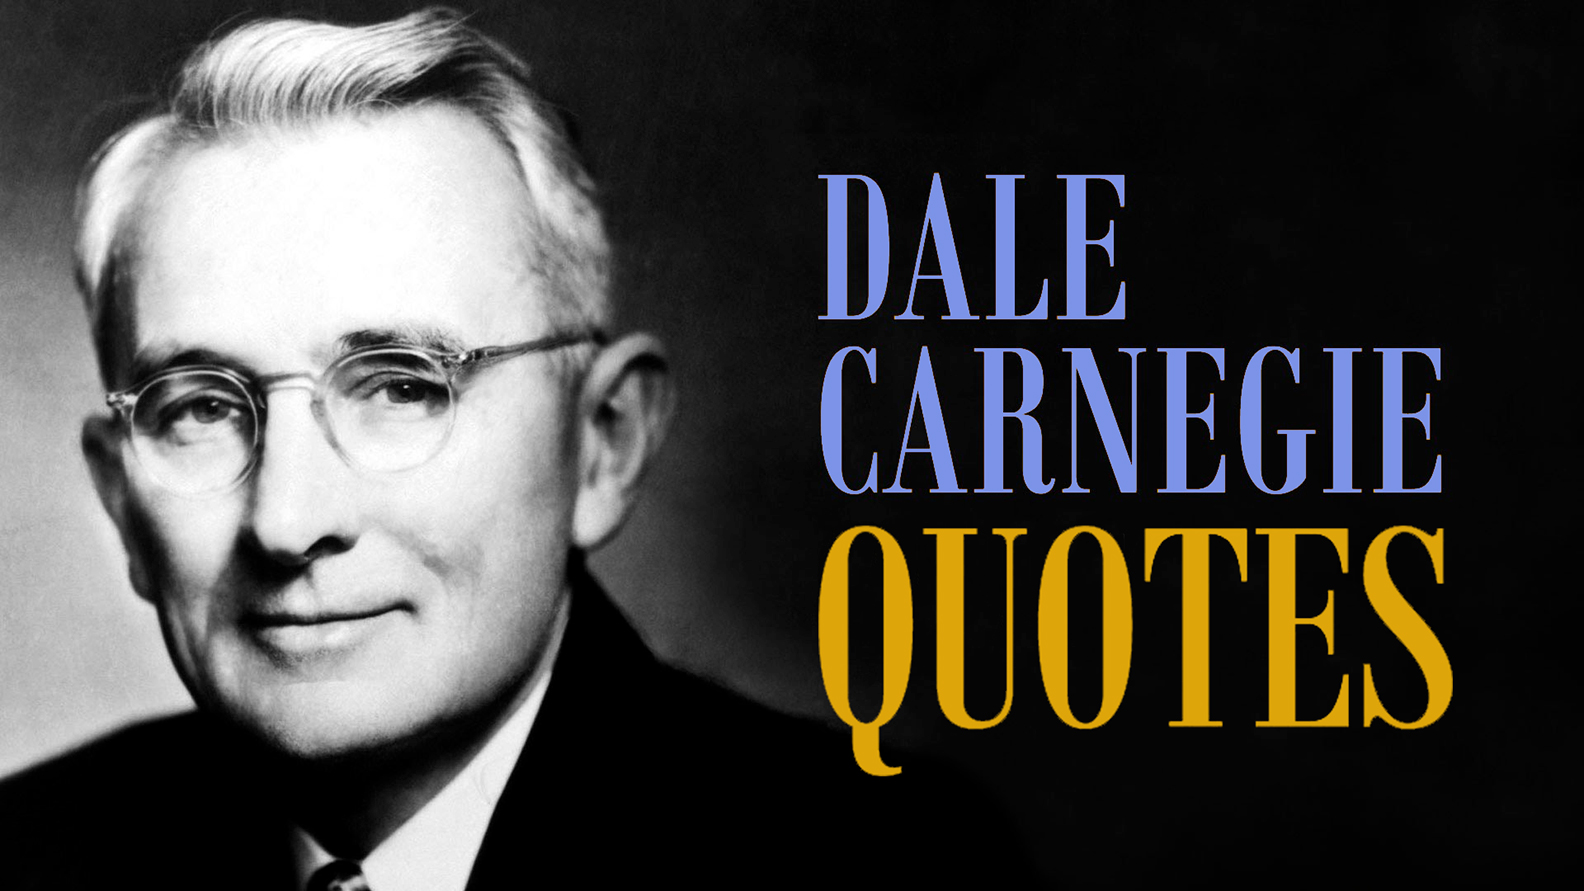 Dale Carnegie feared failure before “How to Make Friends and